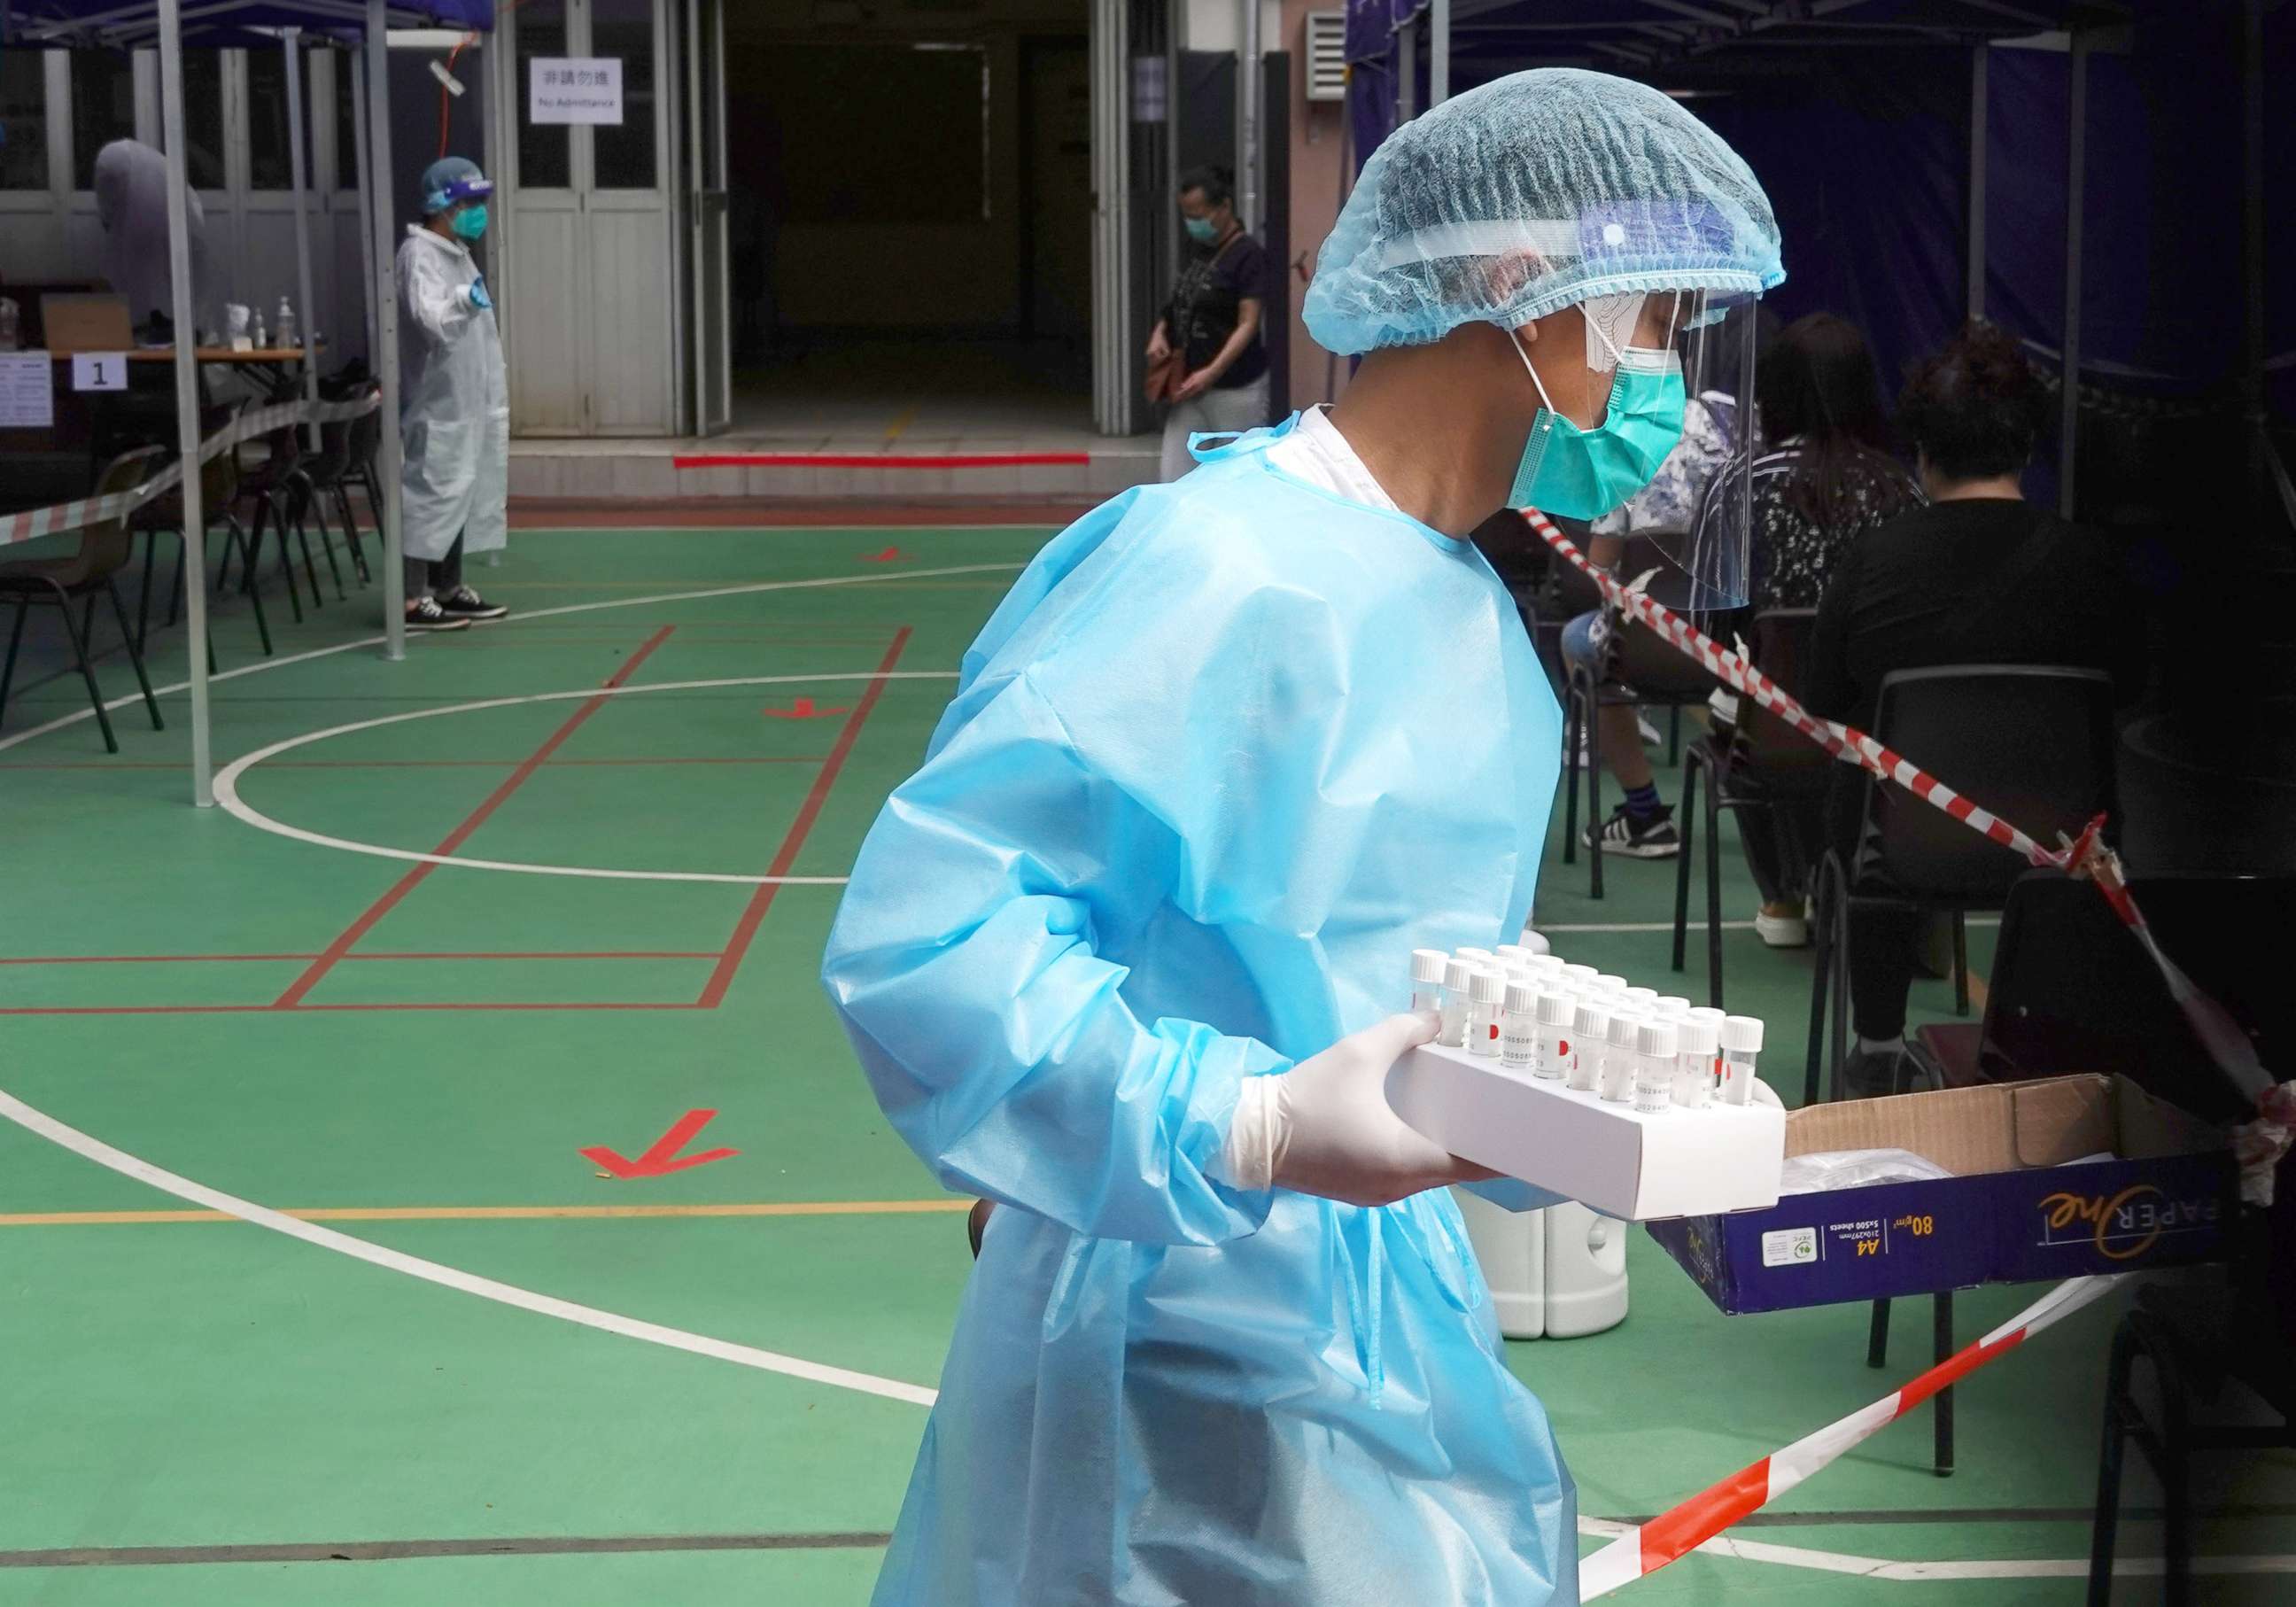 PHOTO: A medical worker in protective suit carries test tubes at a community testing center for the coronavirus disease in Hong Kong's Yau Tsim Mong district, China, Nov. 24, 2020.